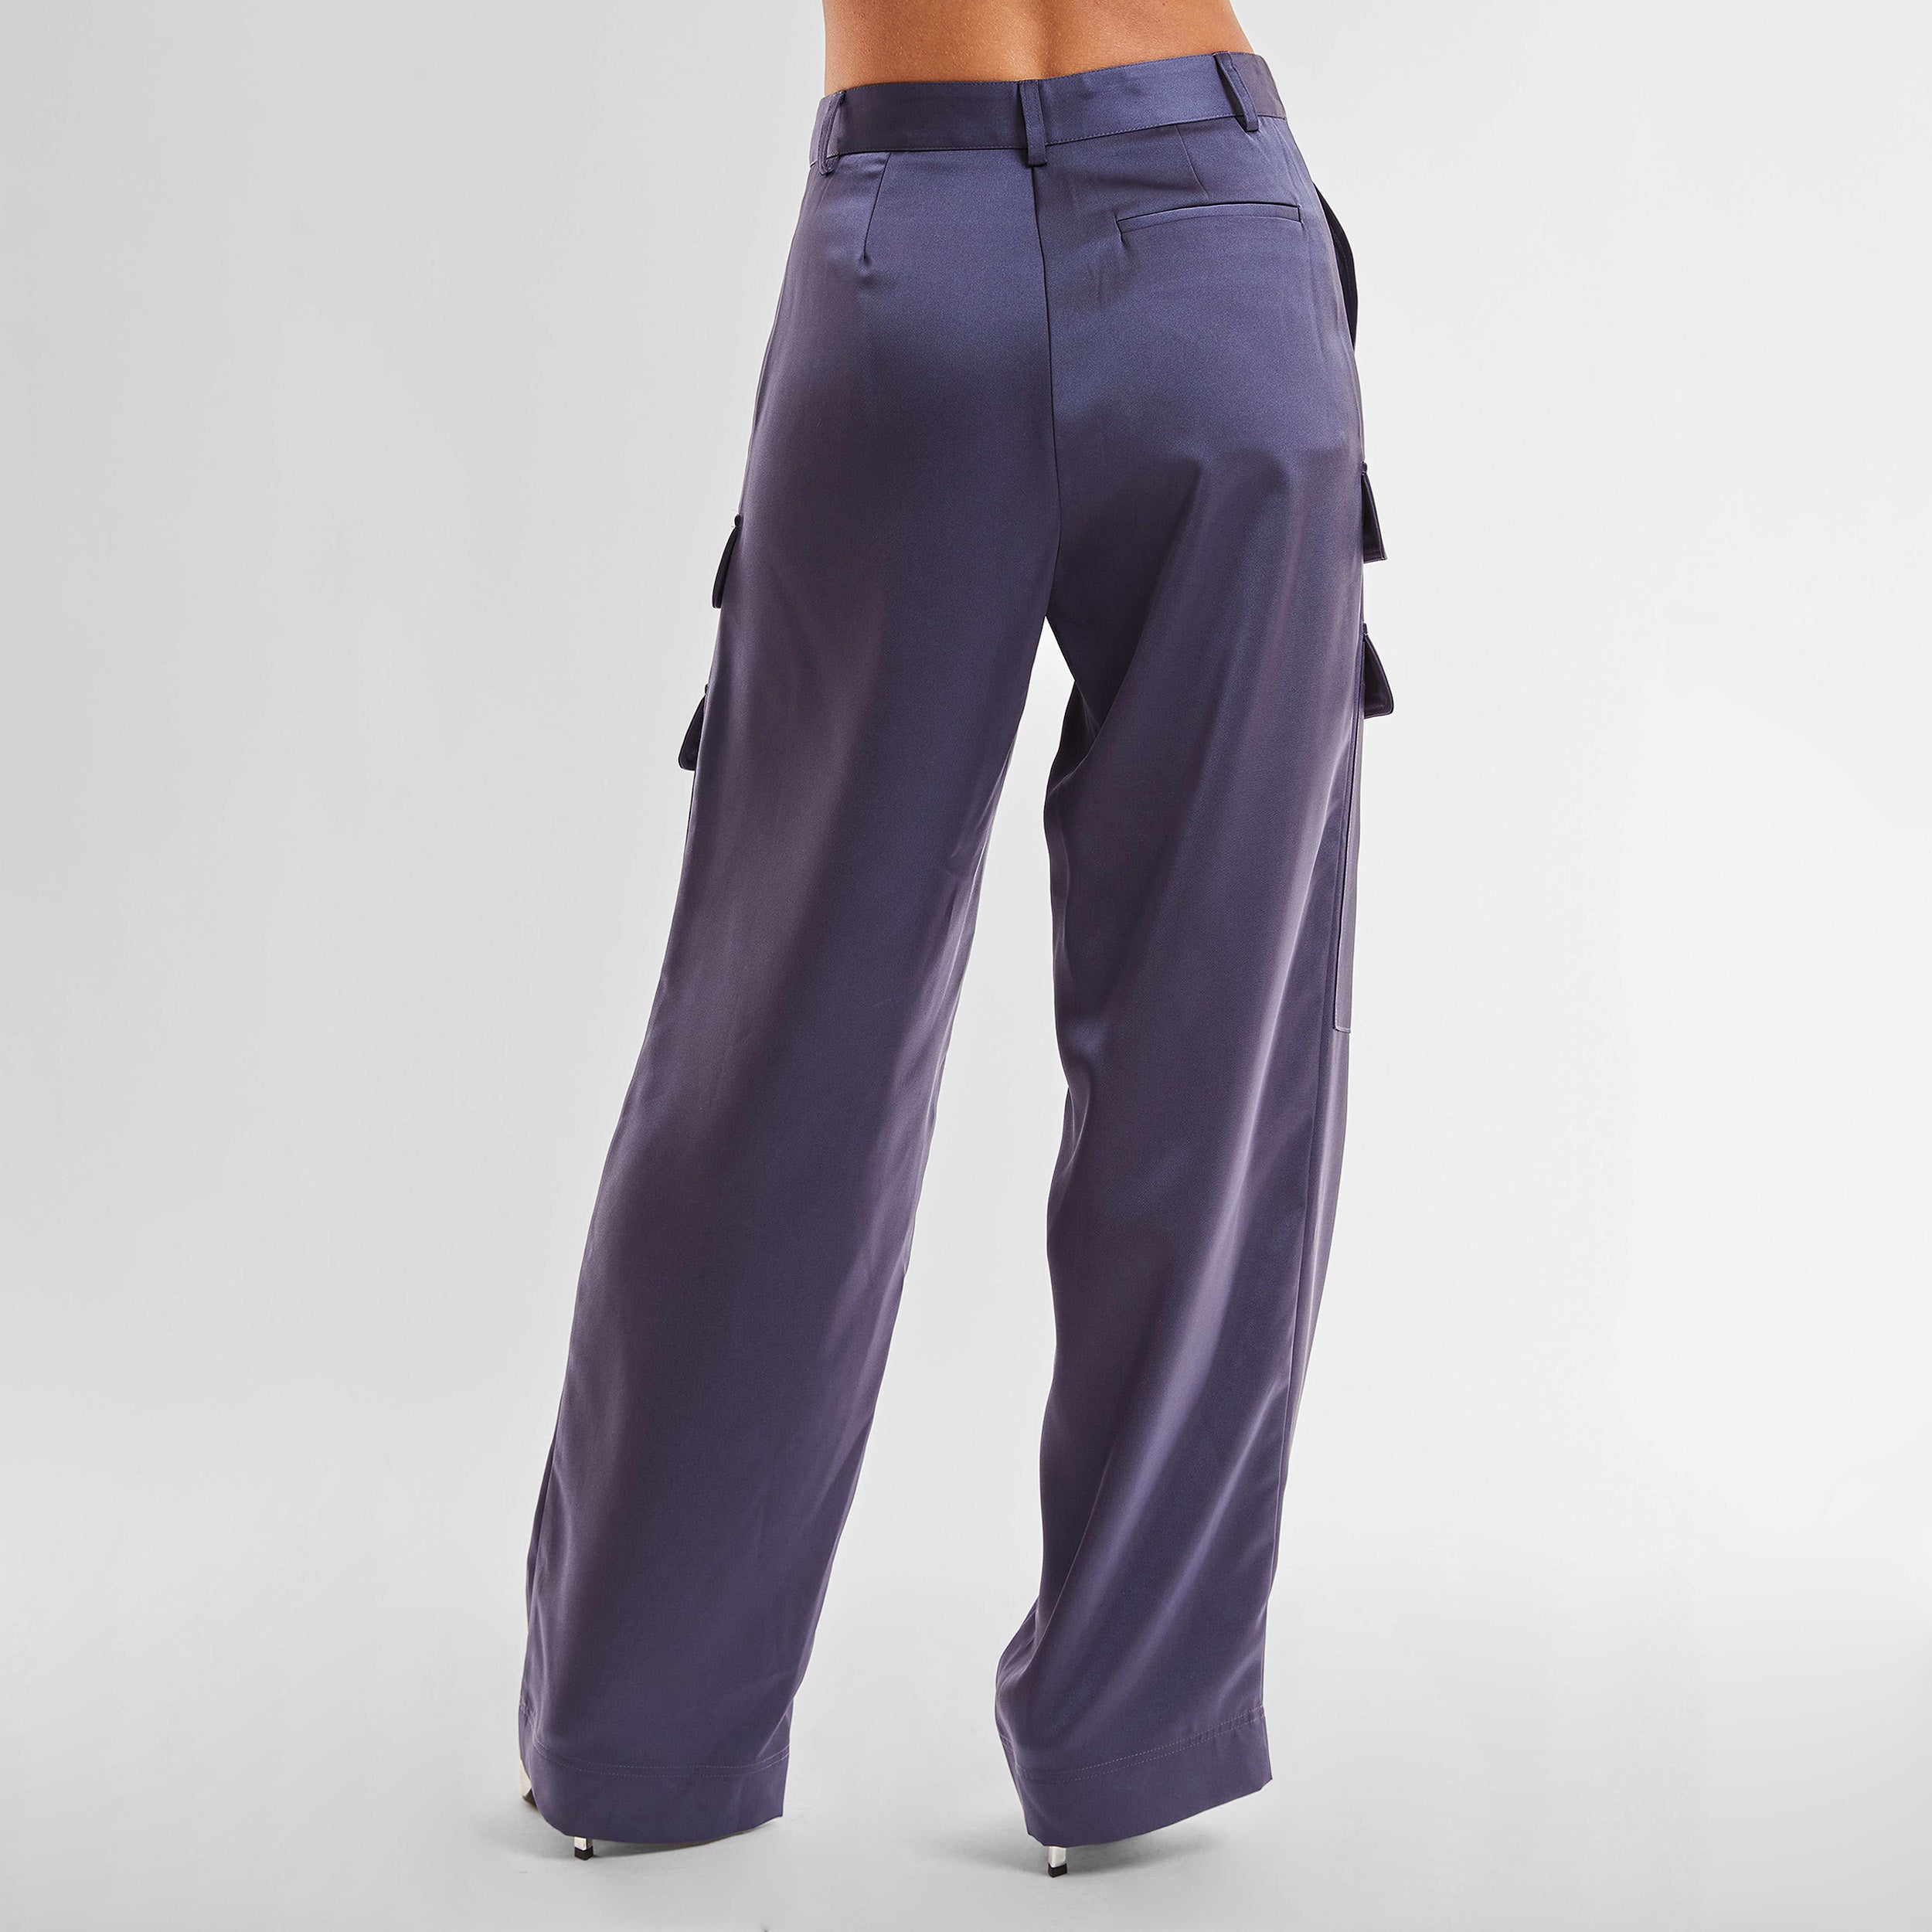 Rear view of woman wearing Navy Satin Milan Pant features Mid-rise with side pockets and cargo detail. Luxurious and structured satin-like fabric. 